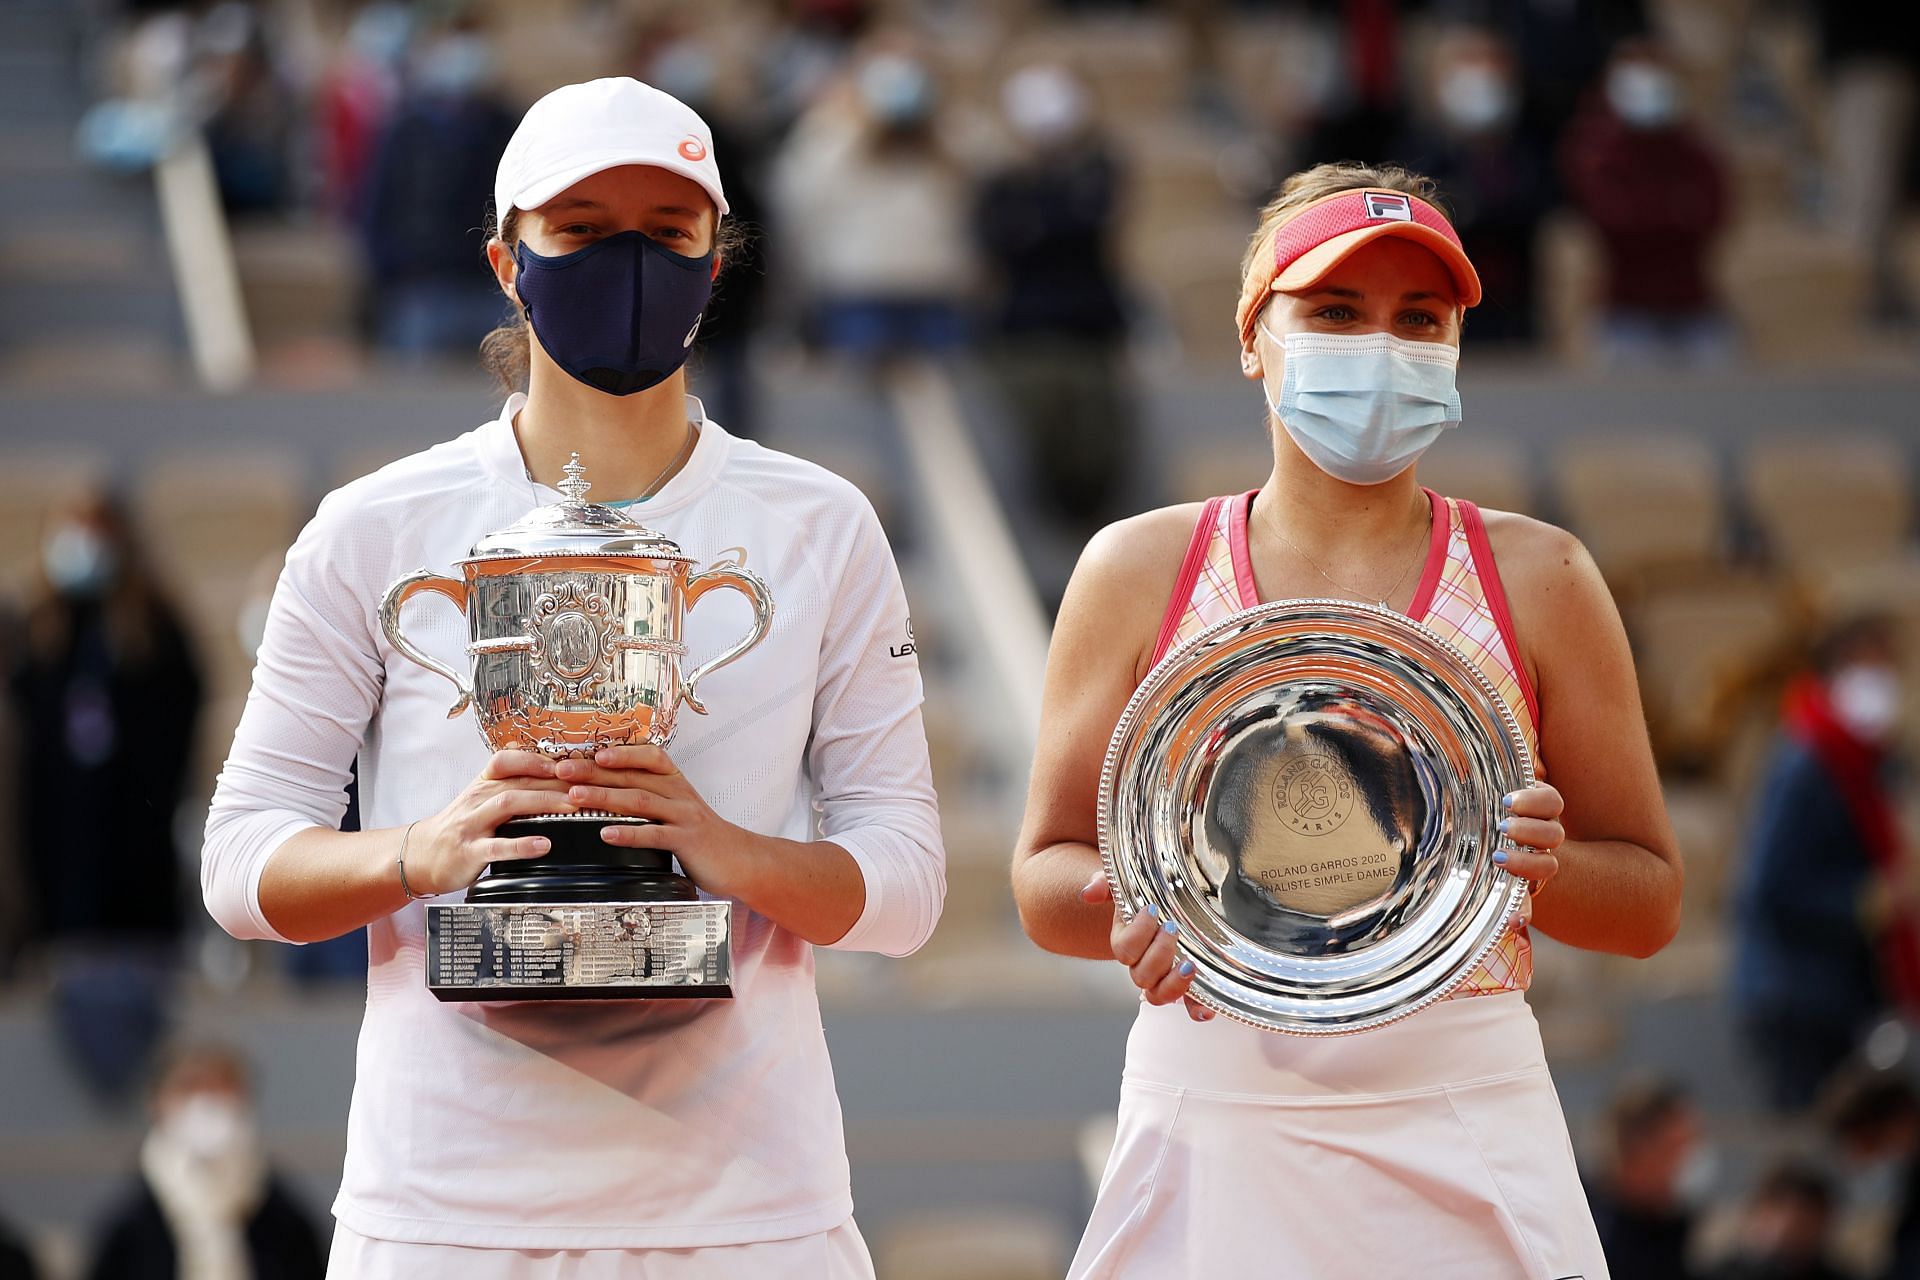 Iga Swiatek previously defeated Sofia Kenin to win her maiden Grand Slam at 2020 French Open